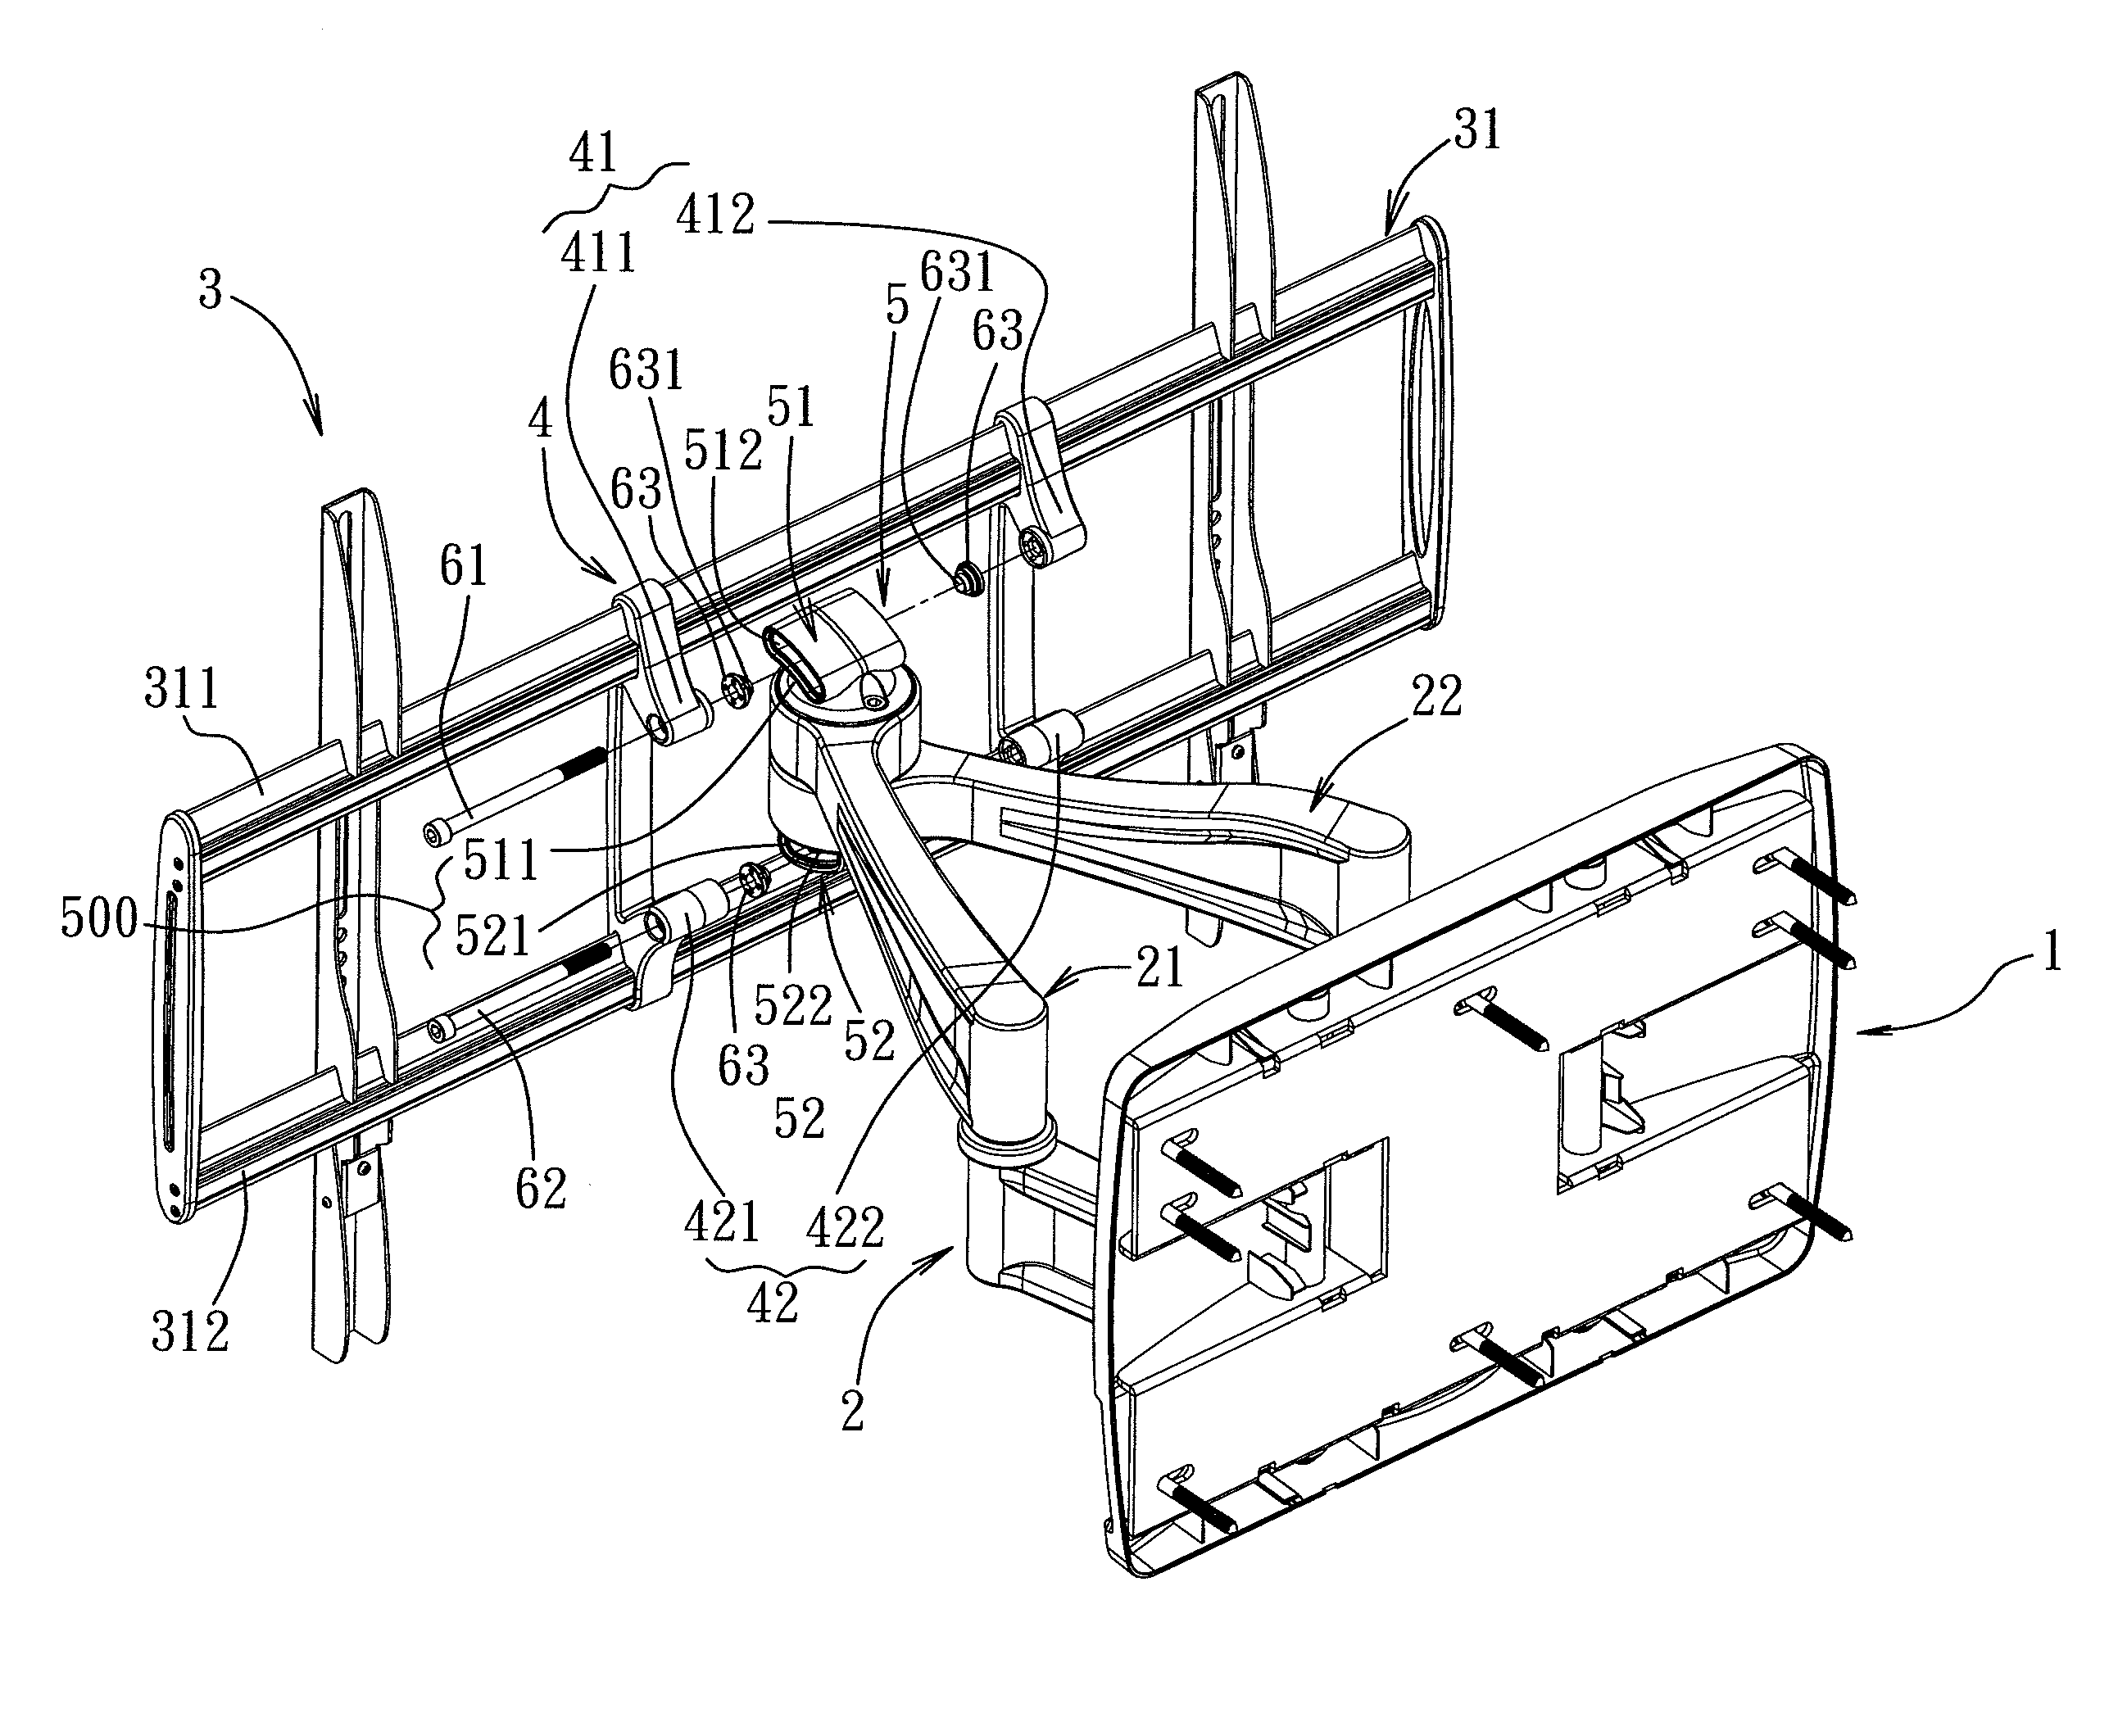 Display mounting assembly